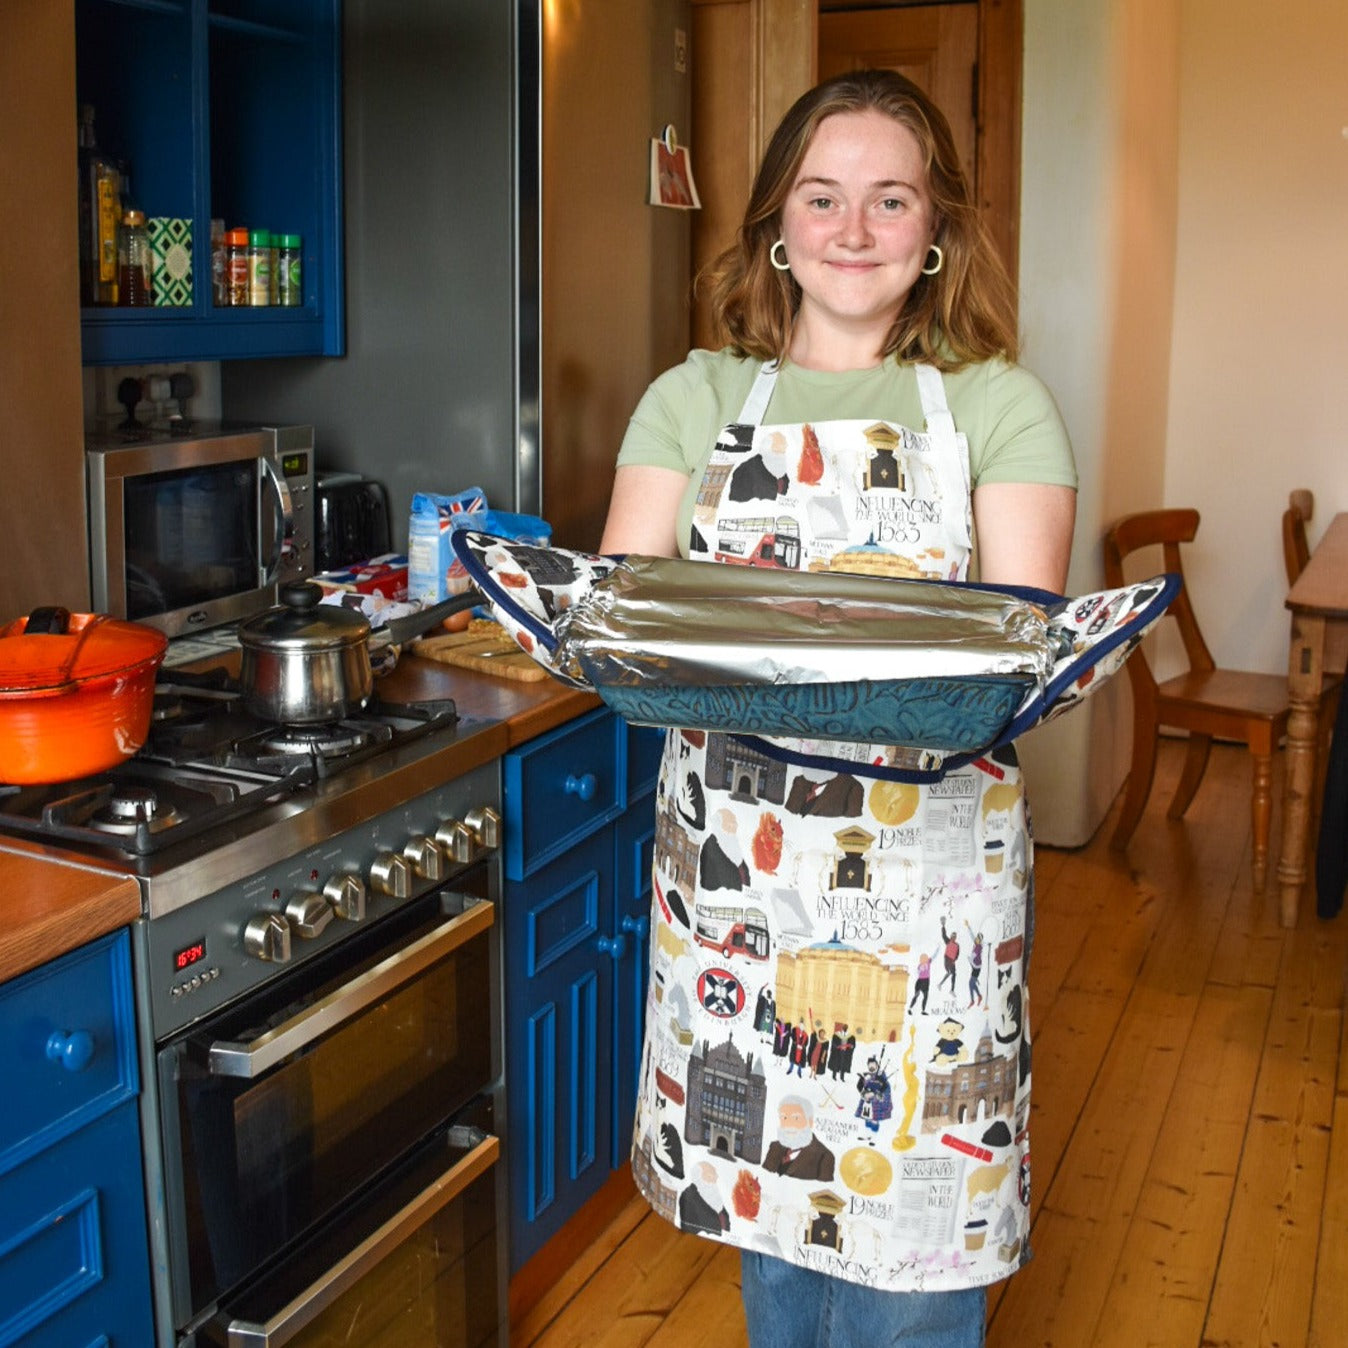 Model wears apron and oven gloves with illustrations of various University of Edinburgh icons, buildings, and figures.